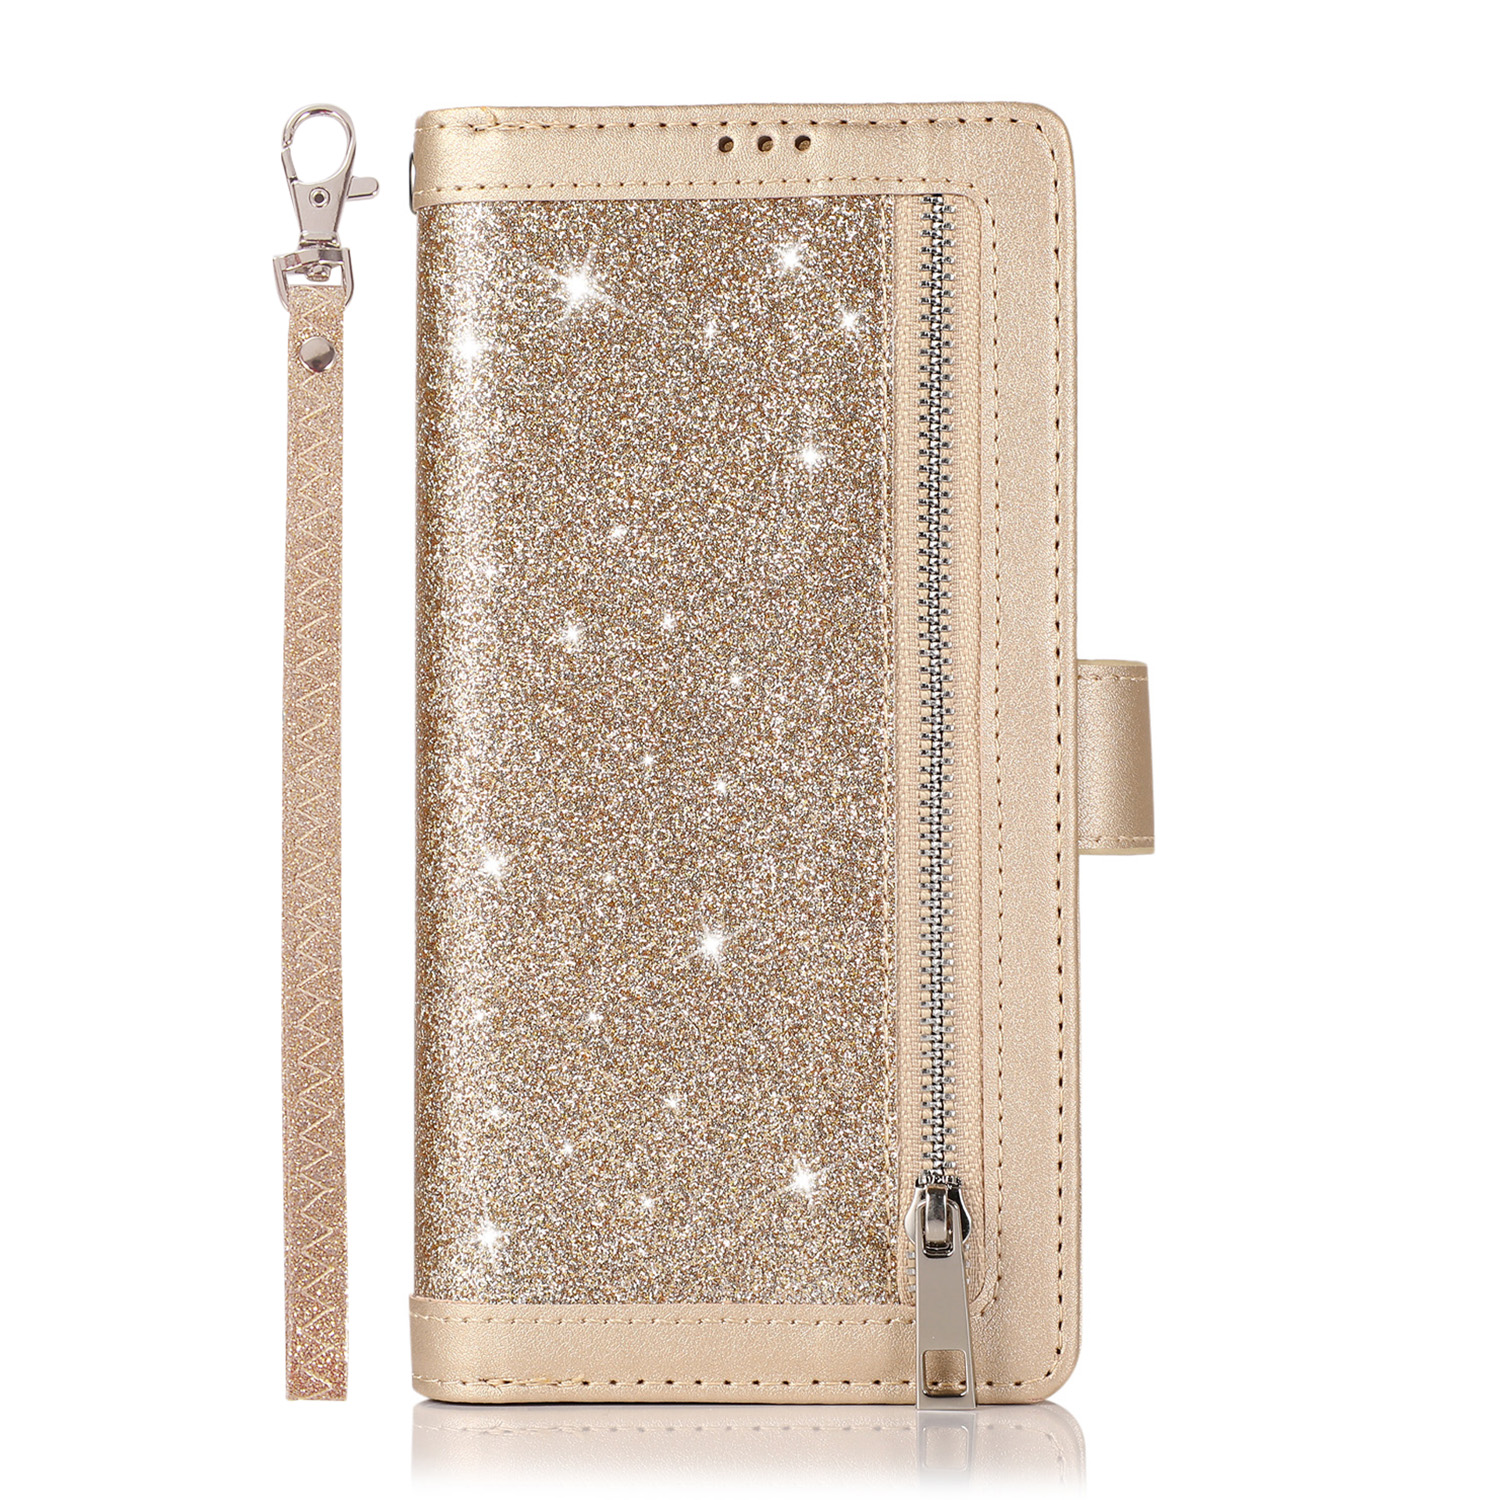 Galaxy S21 Ultra Wallet Case,Allytech Bling Flip Folio PU Leather Magnetic Kickstand Cell Phone Cover with Credit Card Holder,Zipper Pocket Wrist Strap for Samsung Galaxy S21 Ultra 5G 6.8 Inch, Gold - image 2 of 7